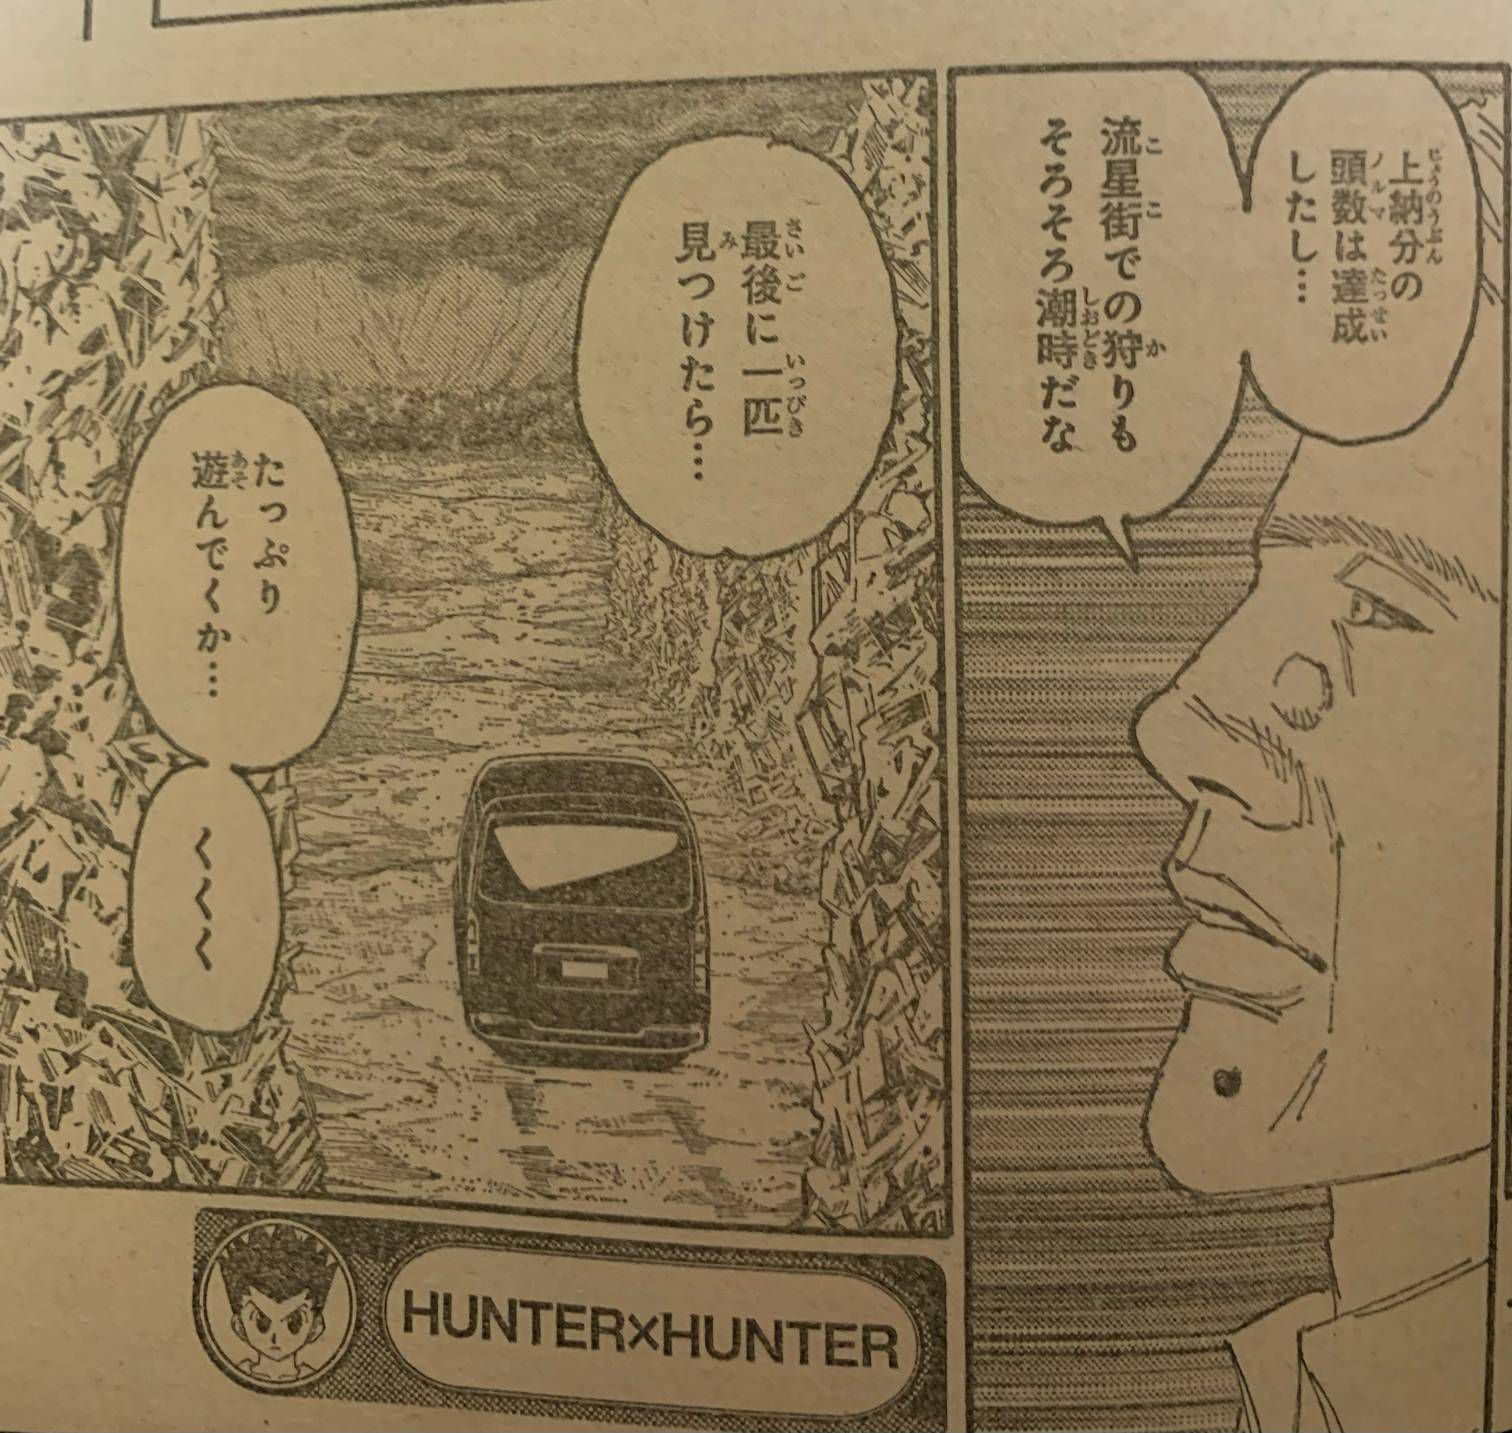 【Caution】Hunter hunter depicts a girl being raped and brutally murdered 3